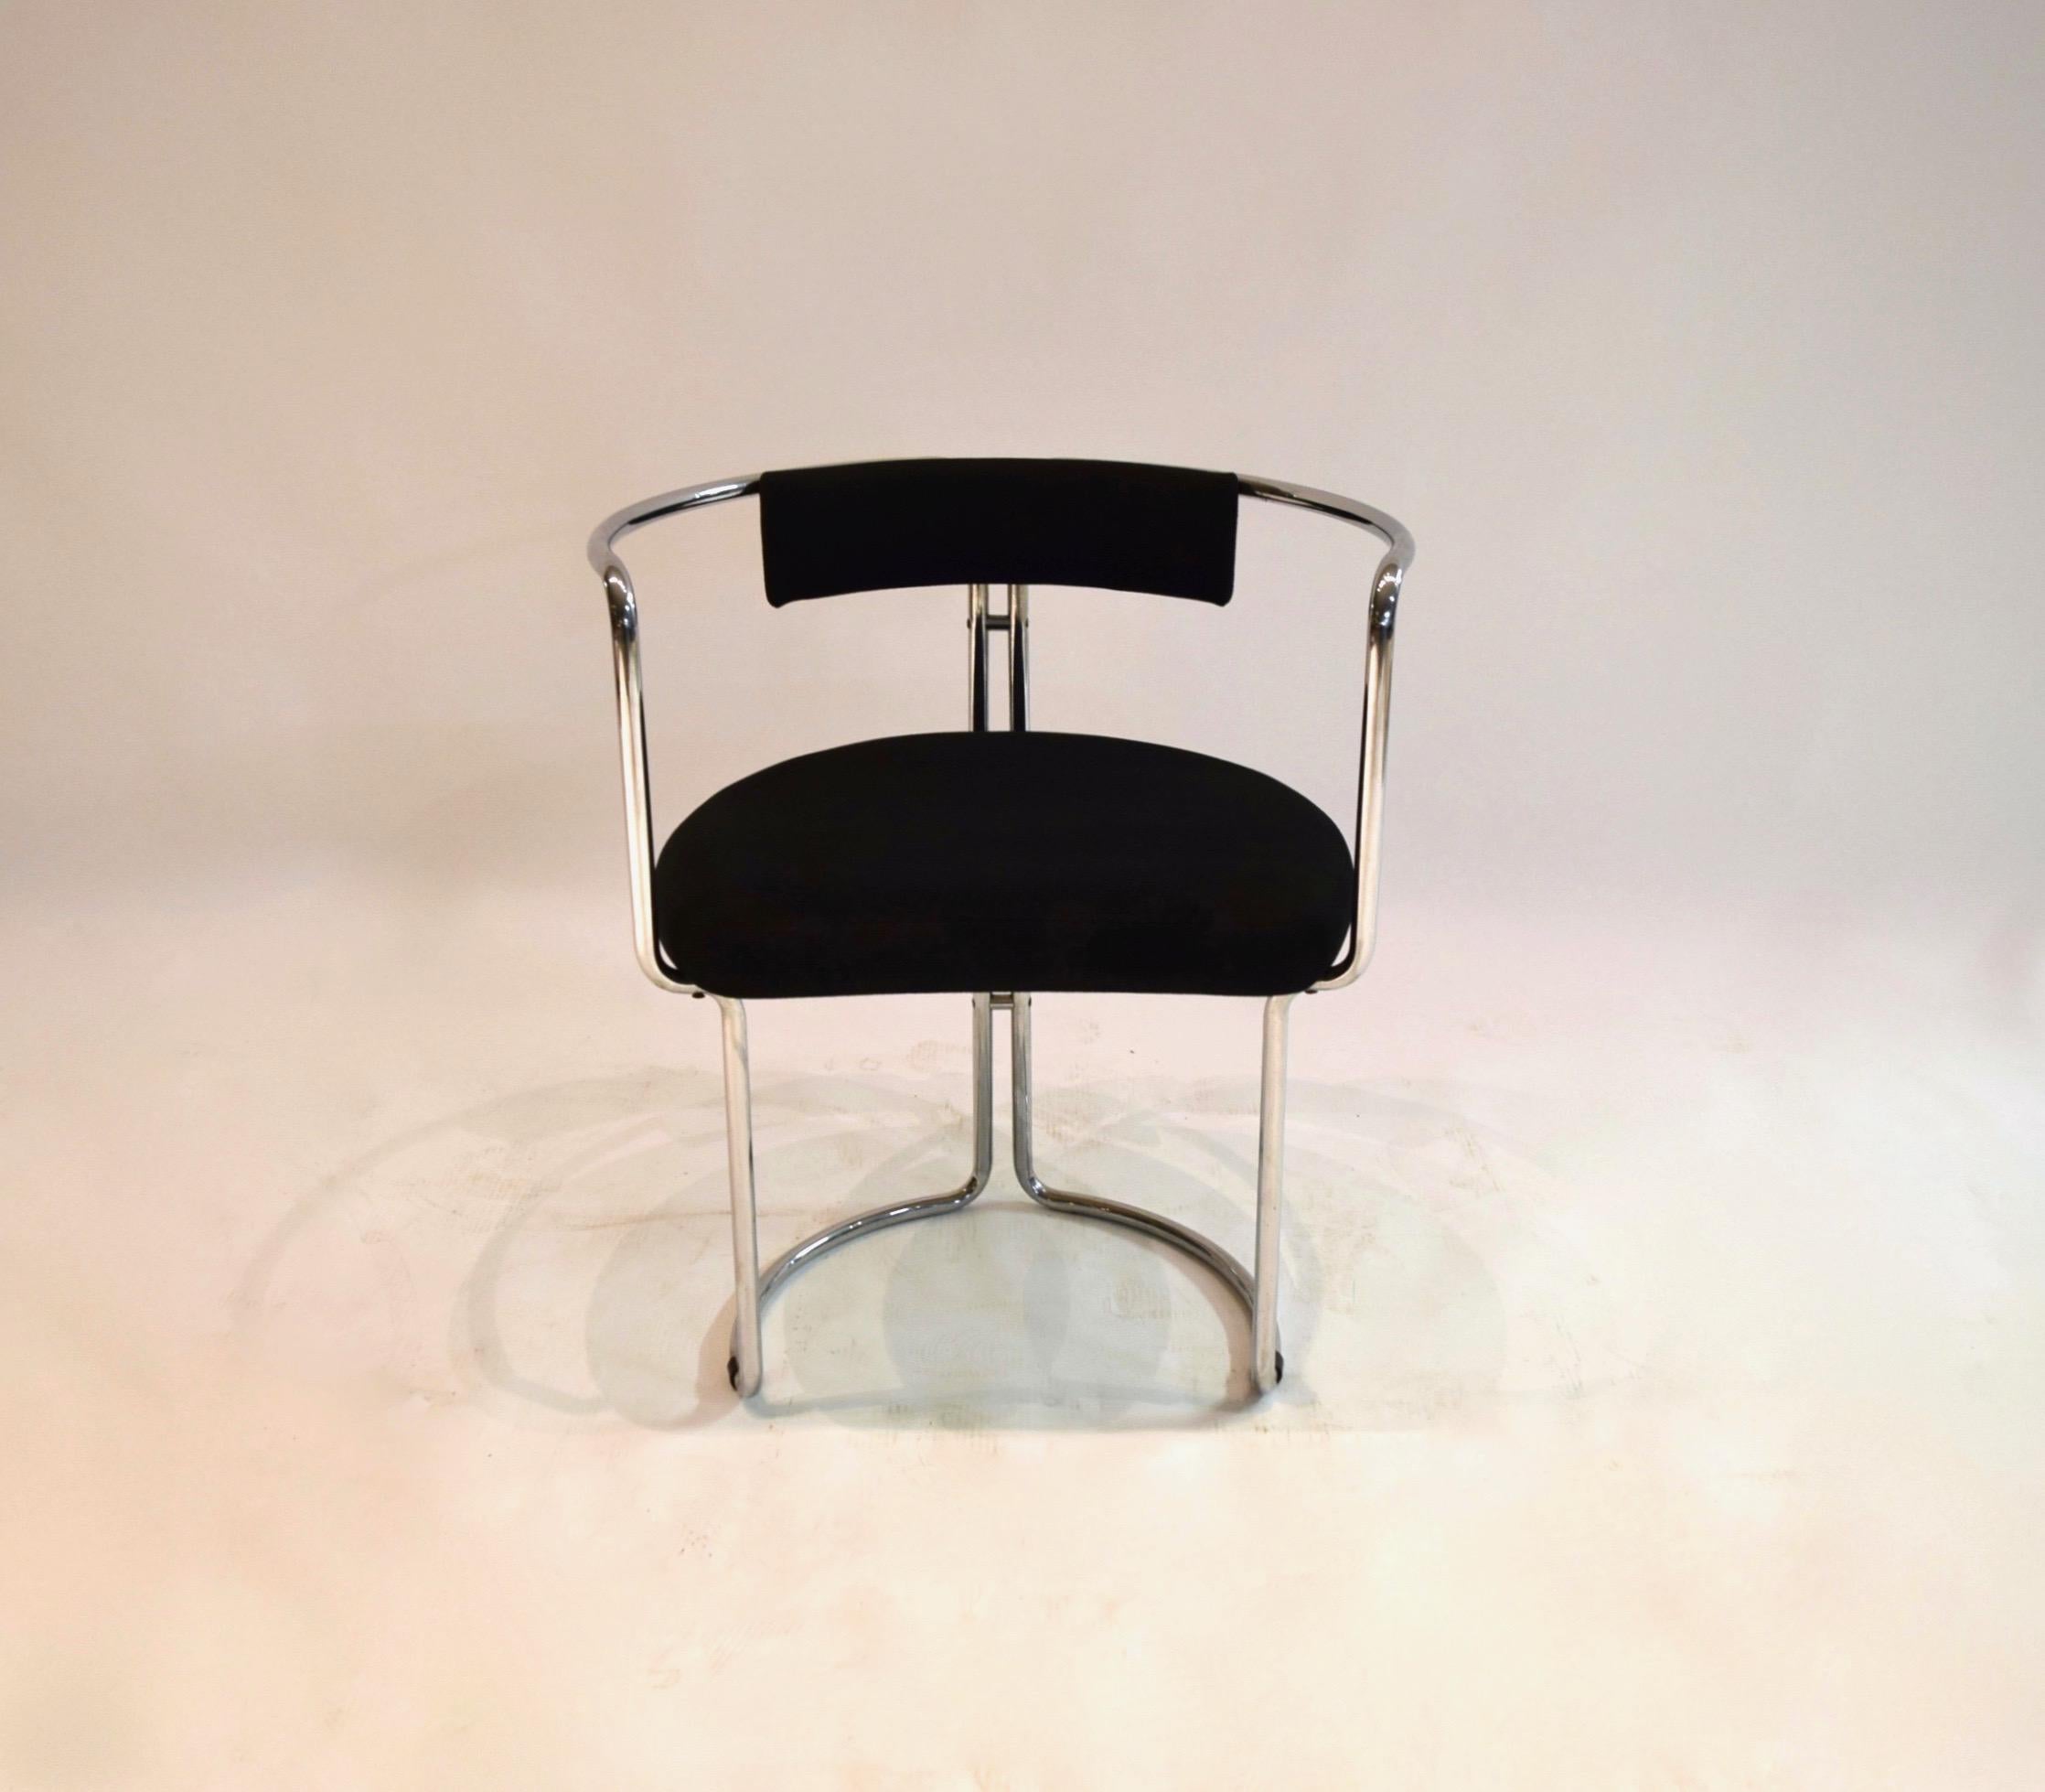 Four tubular chrome-plated metal framed chairs with curved corners, a U-shaped at the base, and a rounded back. The backrest and seat cushion are upholstered in a black ribbed fabric and have the Otto Gerdau and made in Italy labels on the underside